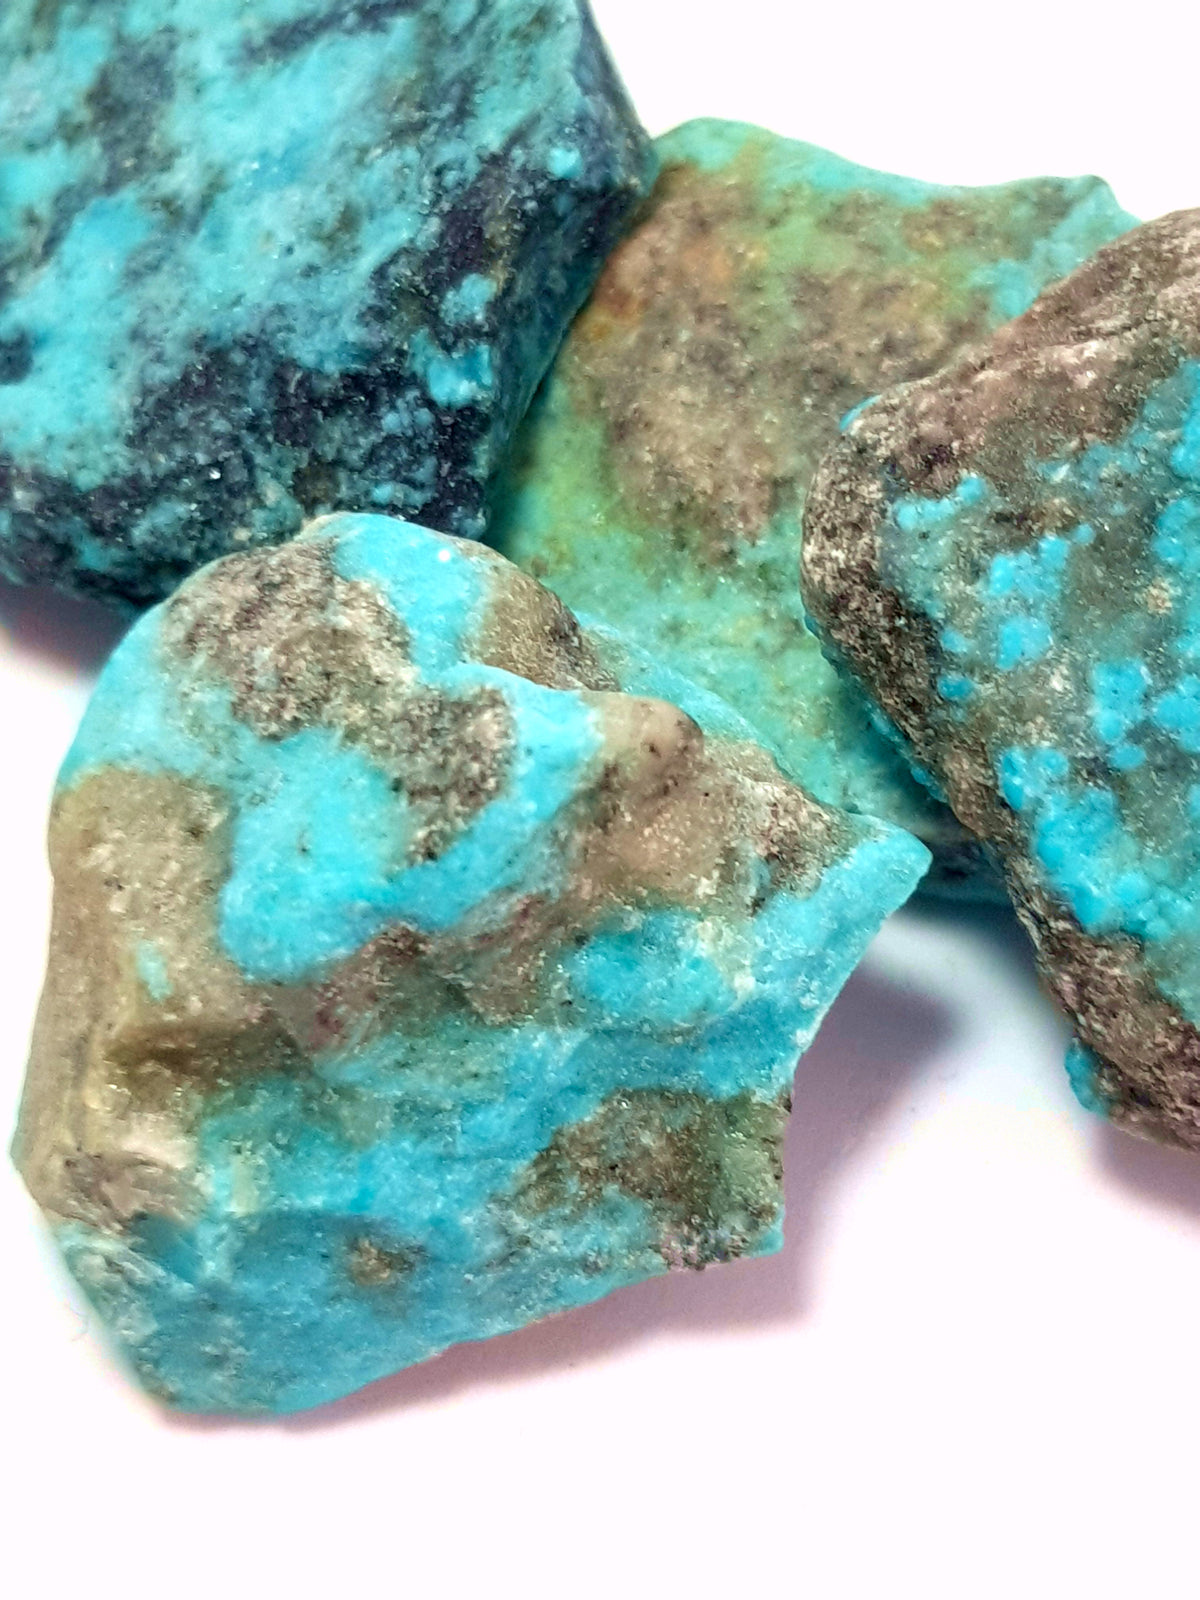 raw samples of kingman turquoise. The turquoise has a strong blue tint to it